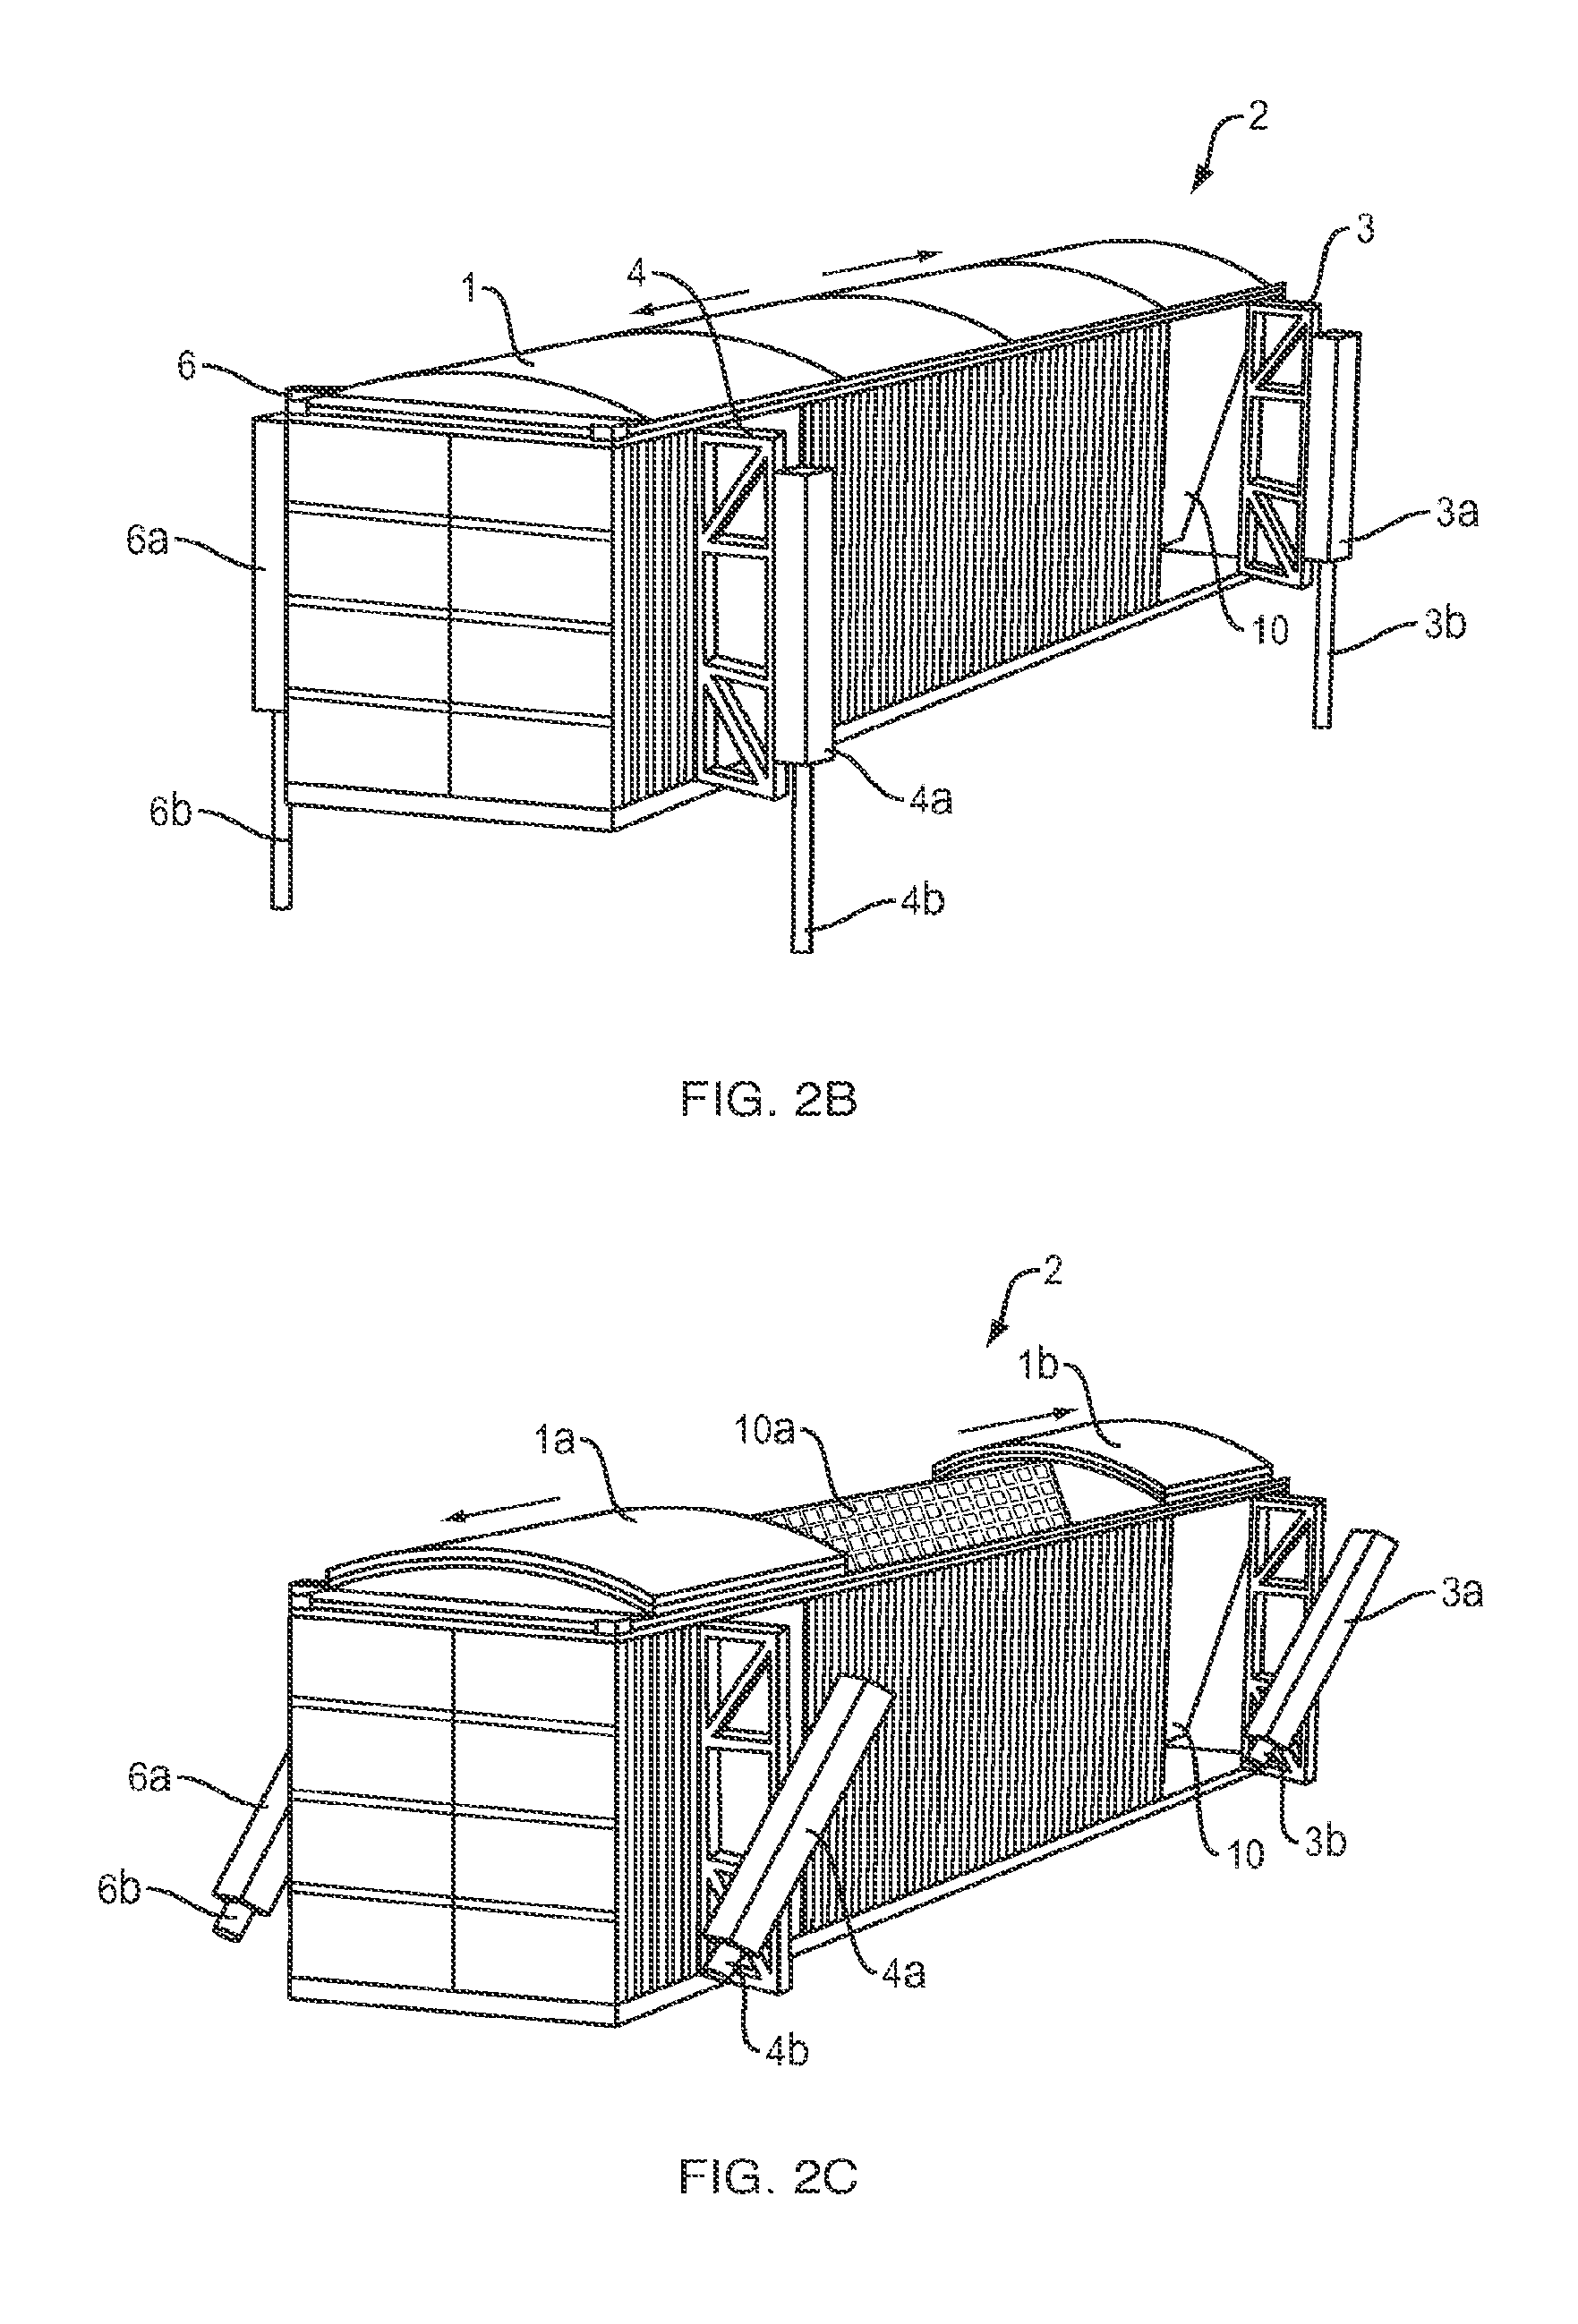 Photovoltaic power apparatus for rapid deployment